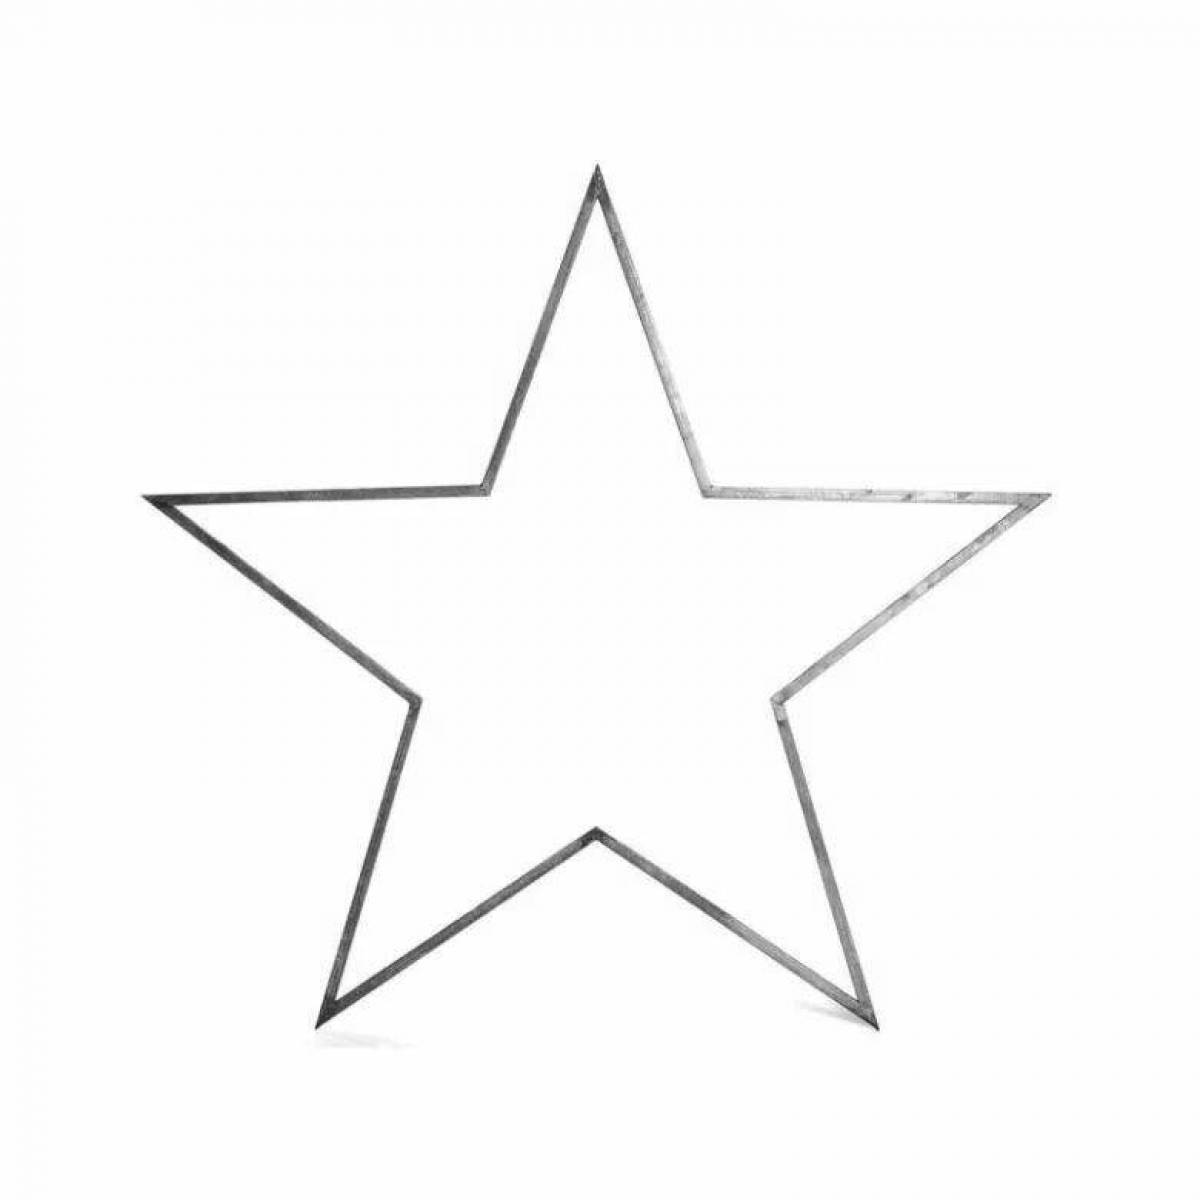 Fun coloring five pointed star